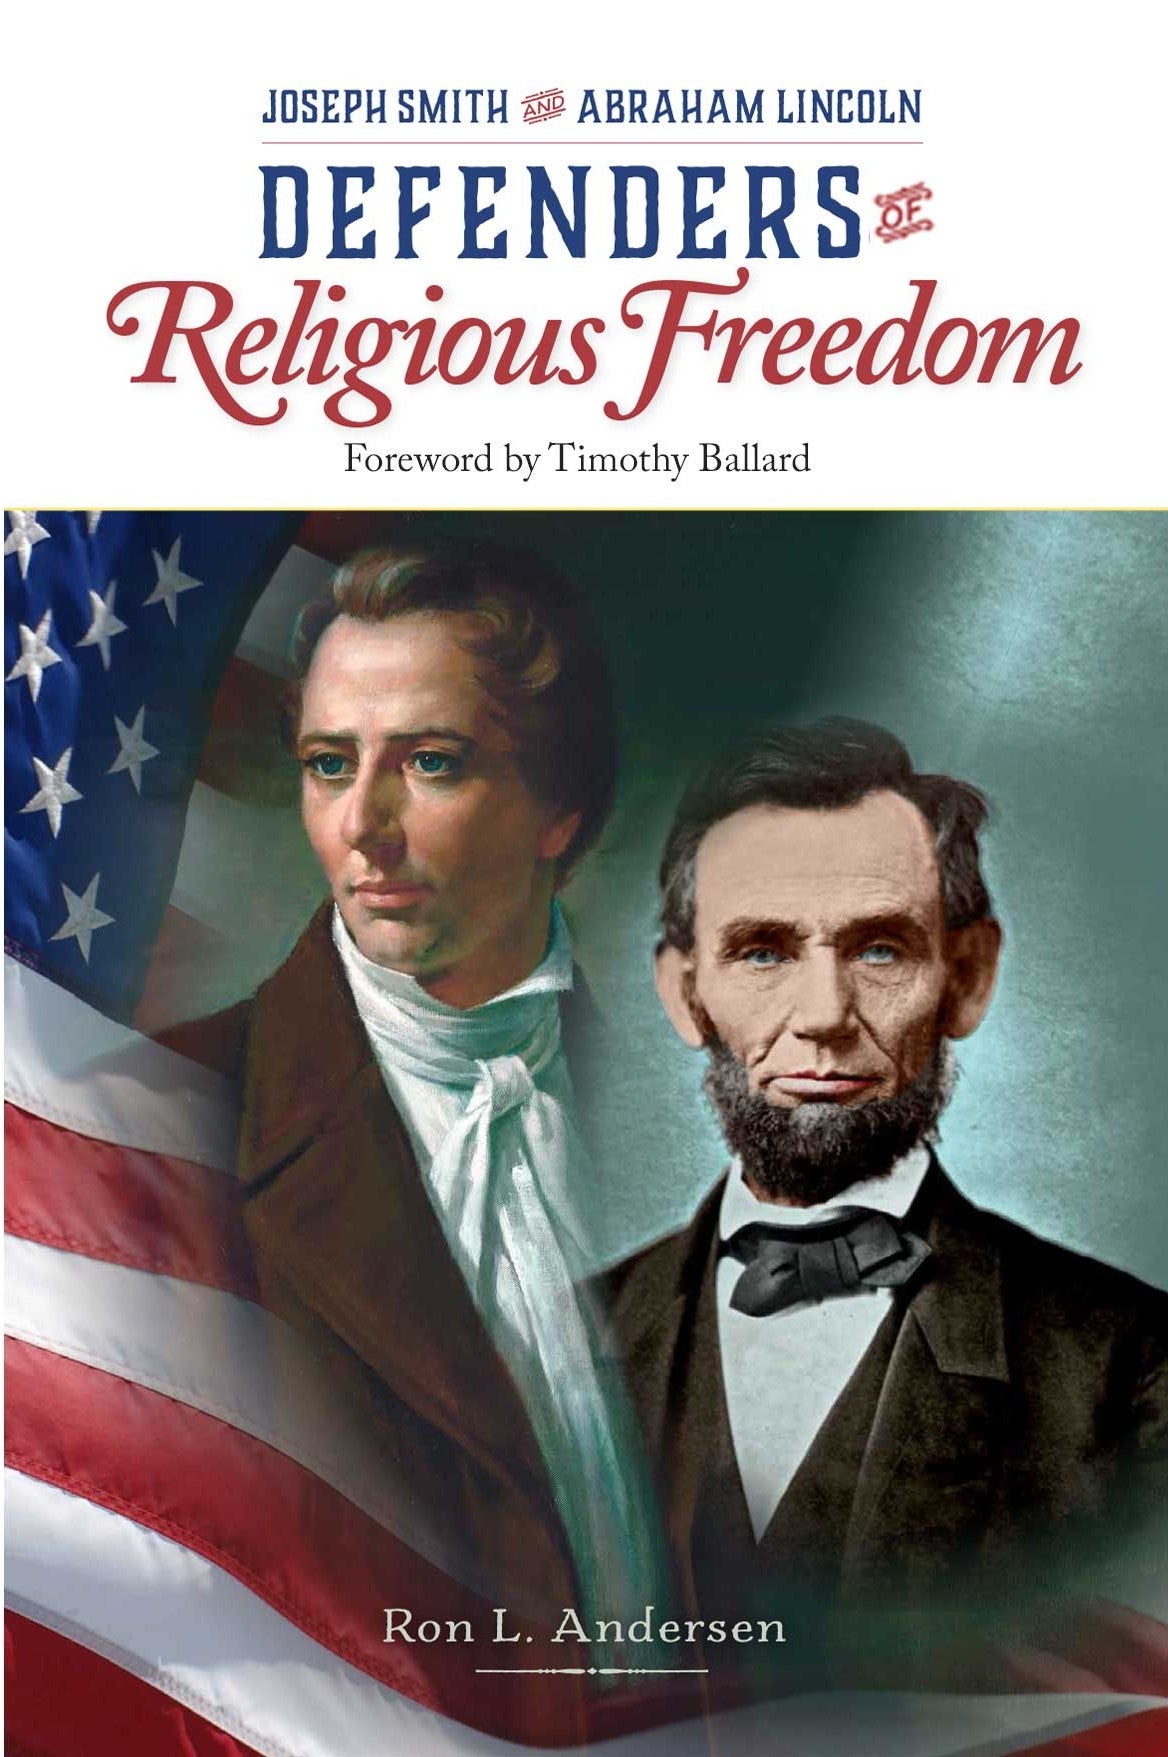 Joseph Smith and Abraham Lincoln: Defenders of Religious Freedom